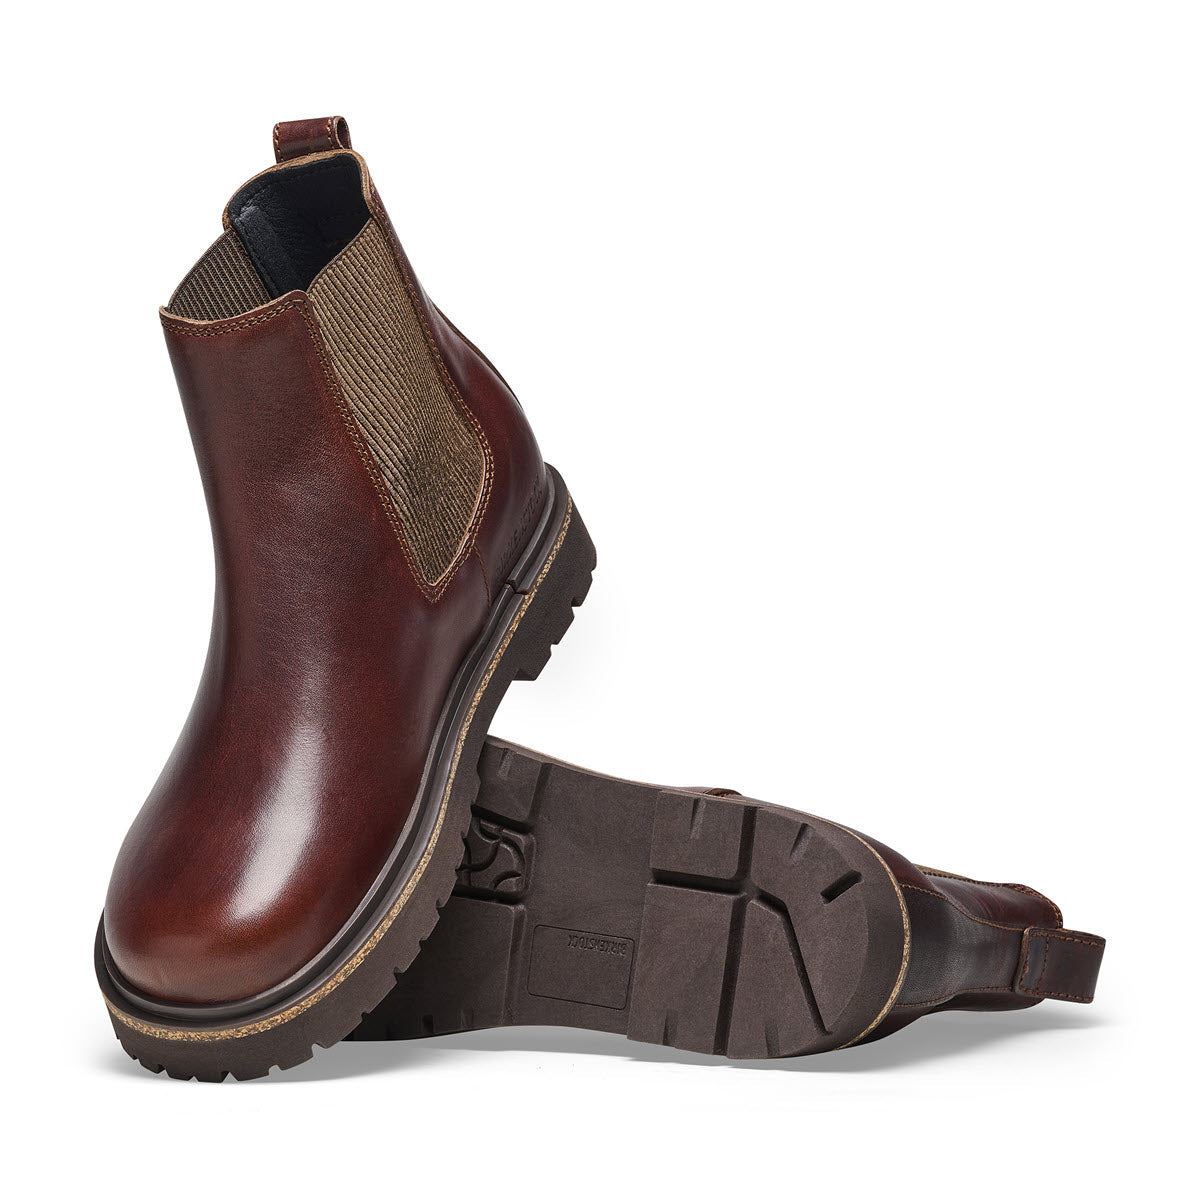 A single brown natural leather Birkenstock Chelsea boot with elastic side panels and a sturdy cork sole, shown from a side angle on a white background.